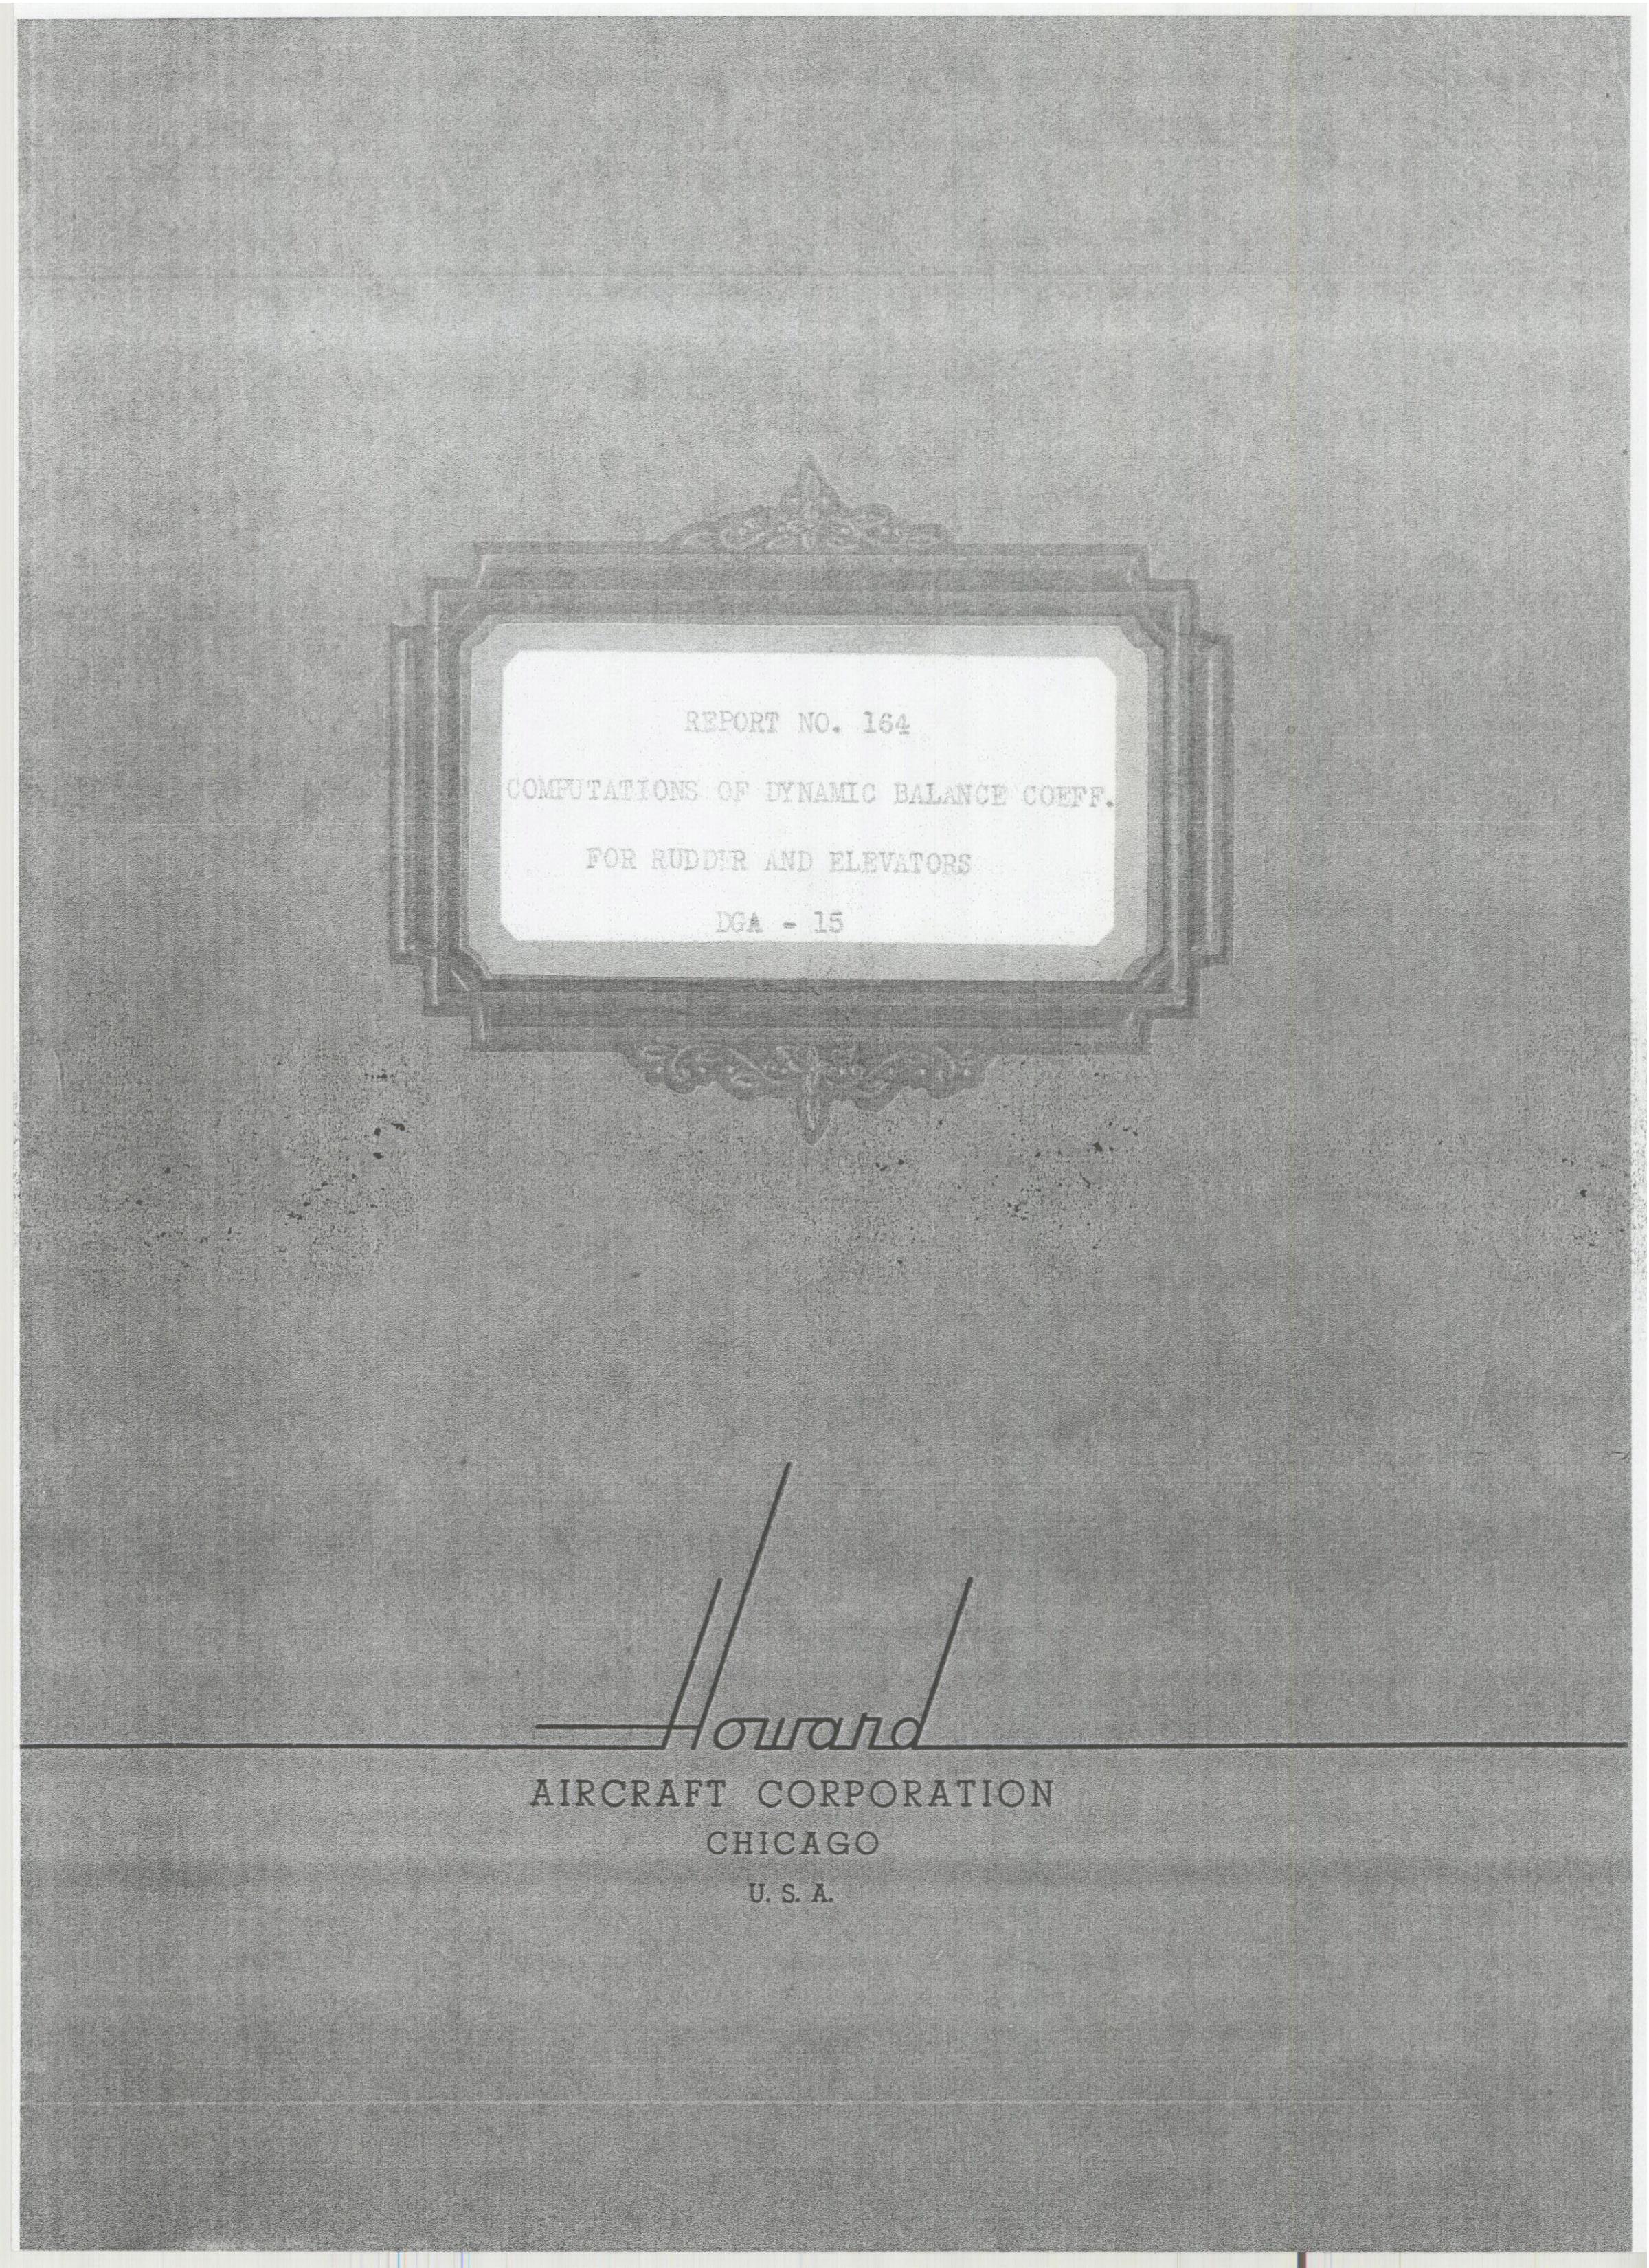 Sample page 1 from AirCorps Library document: Report 164, Dynamic Balance Coefficients for Rudder & Elevators, DGA-15